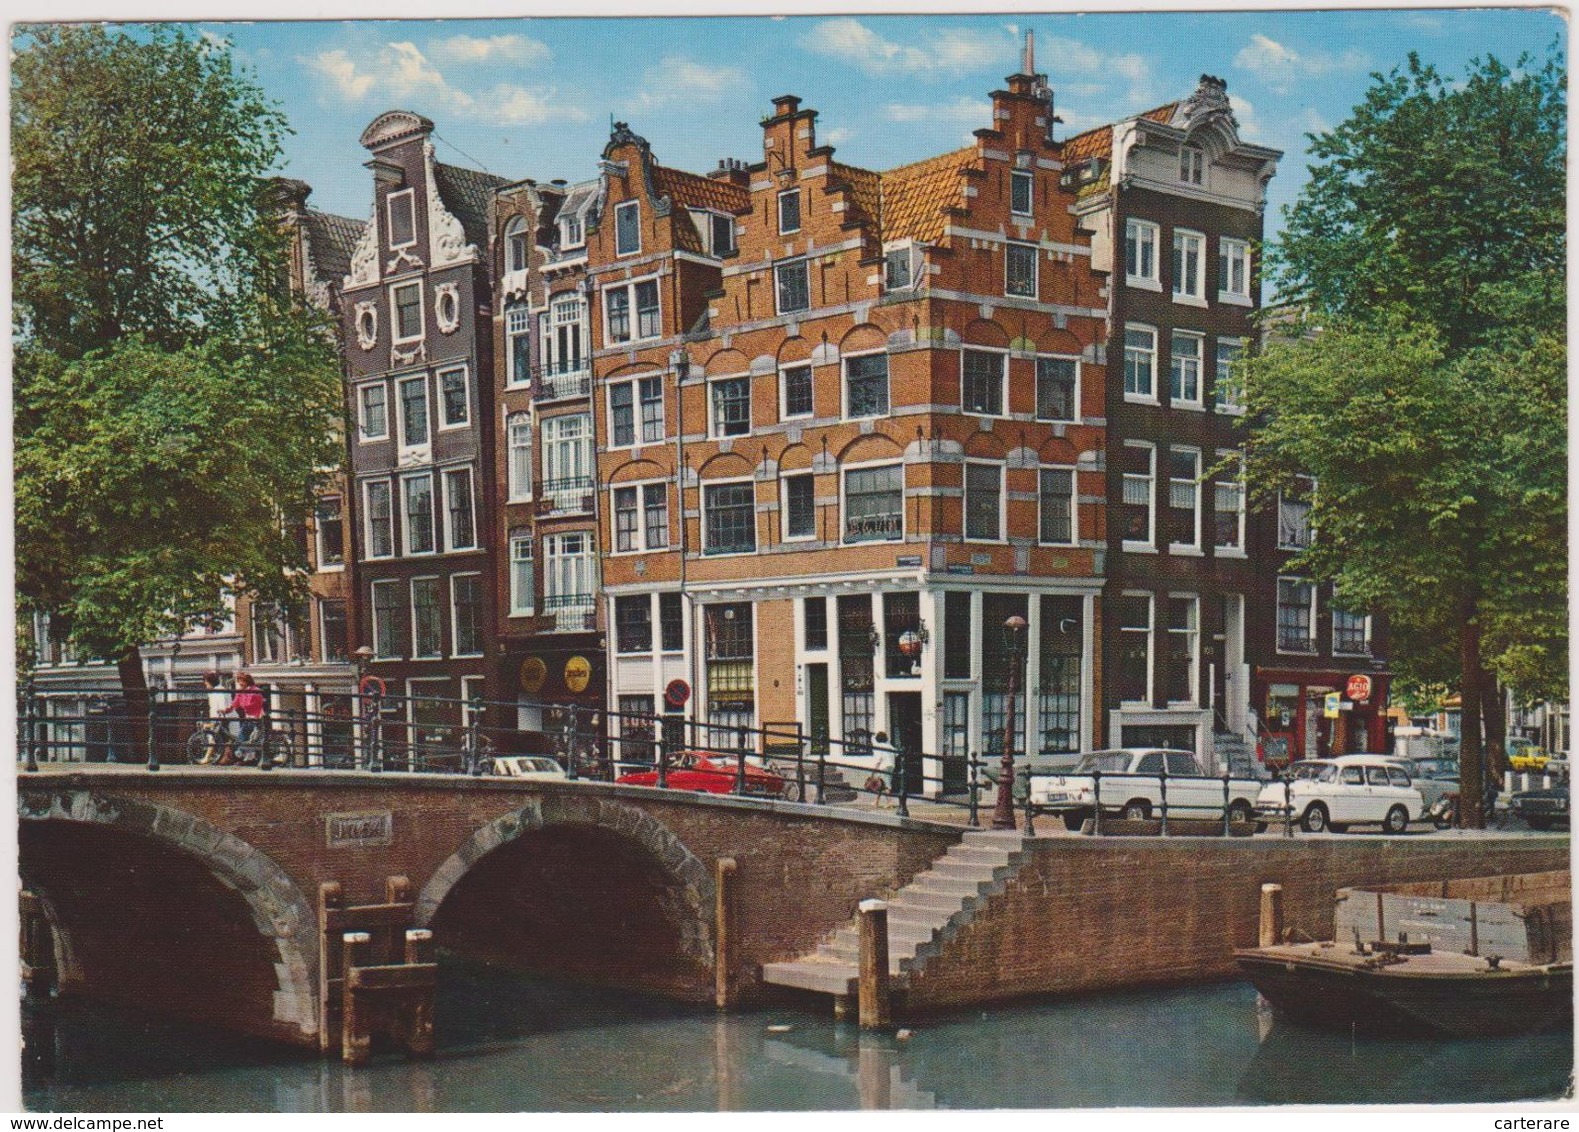 PAYS BAS ,noord Holland,AMSTERDAM ,IL Y A 41 ANS,PRINSENGRACHT,BROUWER SGRACHT,PONT - Amsterdam